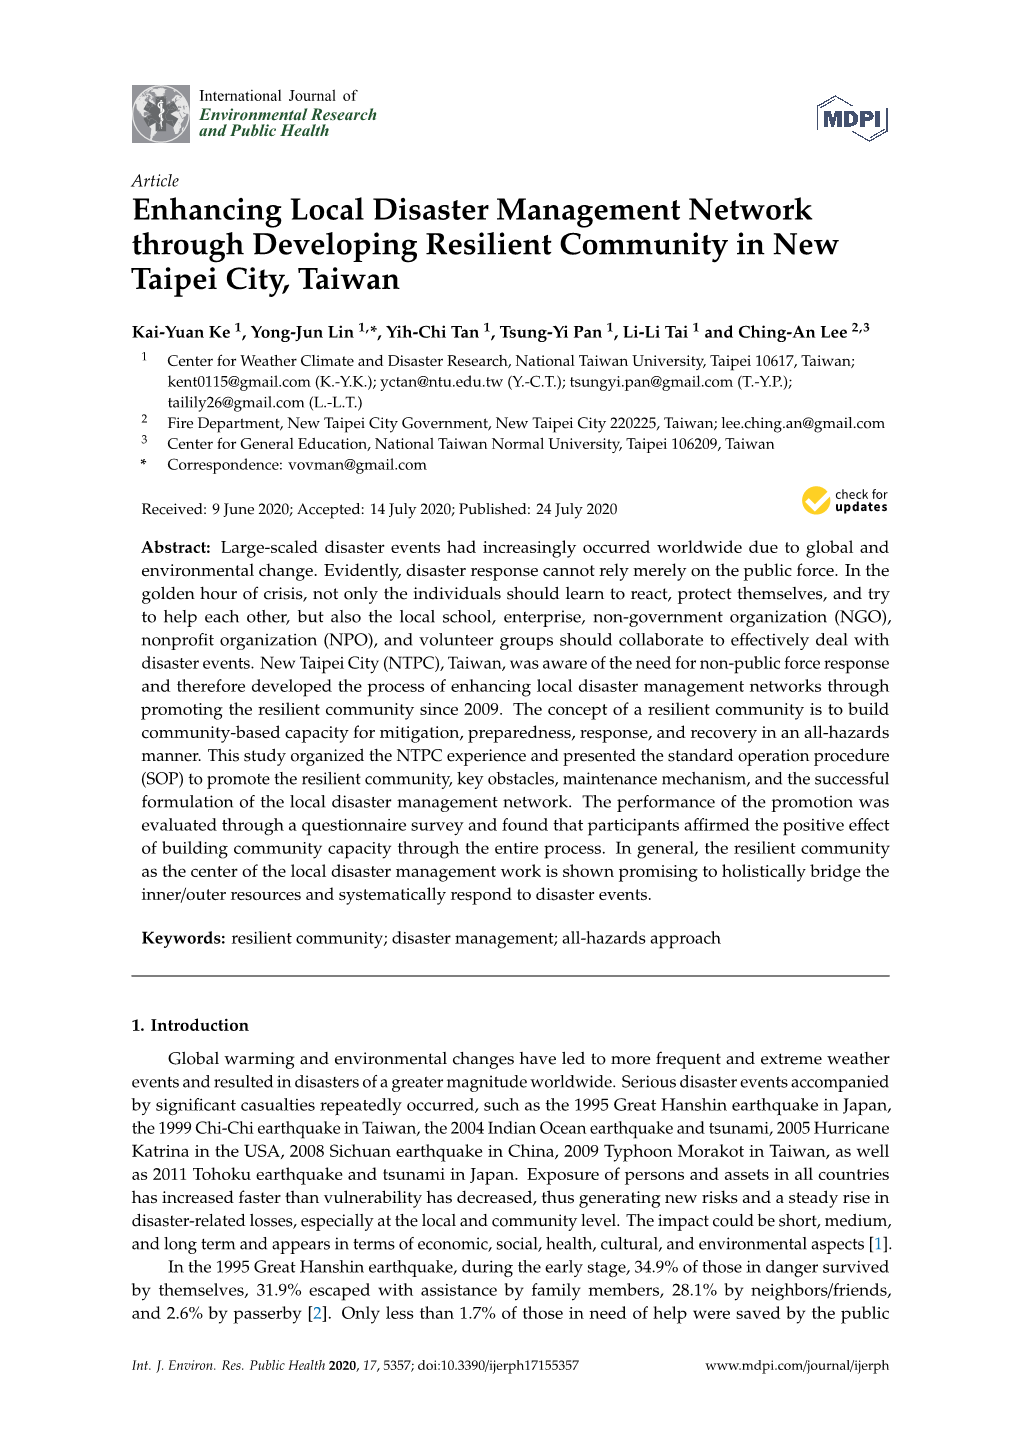 Enhancing Local Disaster Management Network Through Developing Resilient Community in New Taipei City, Taiwan